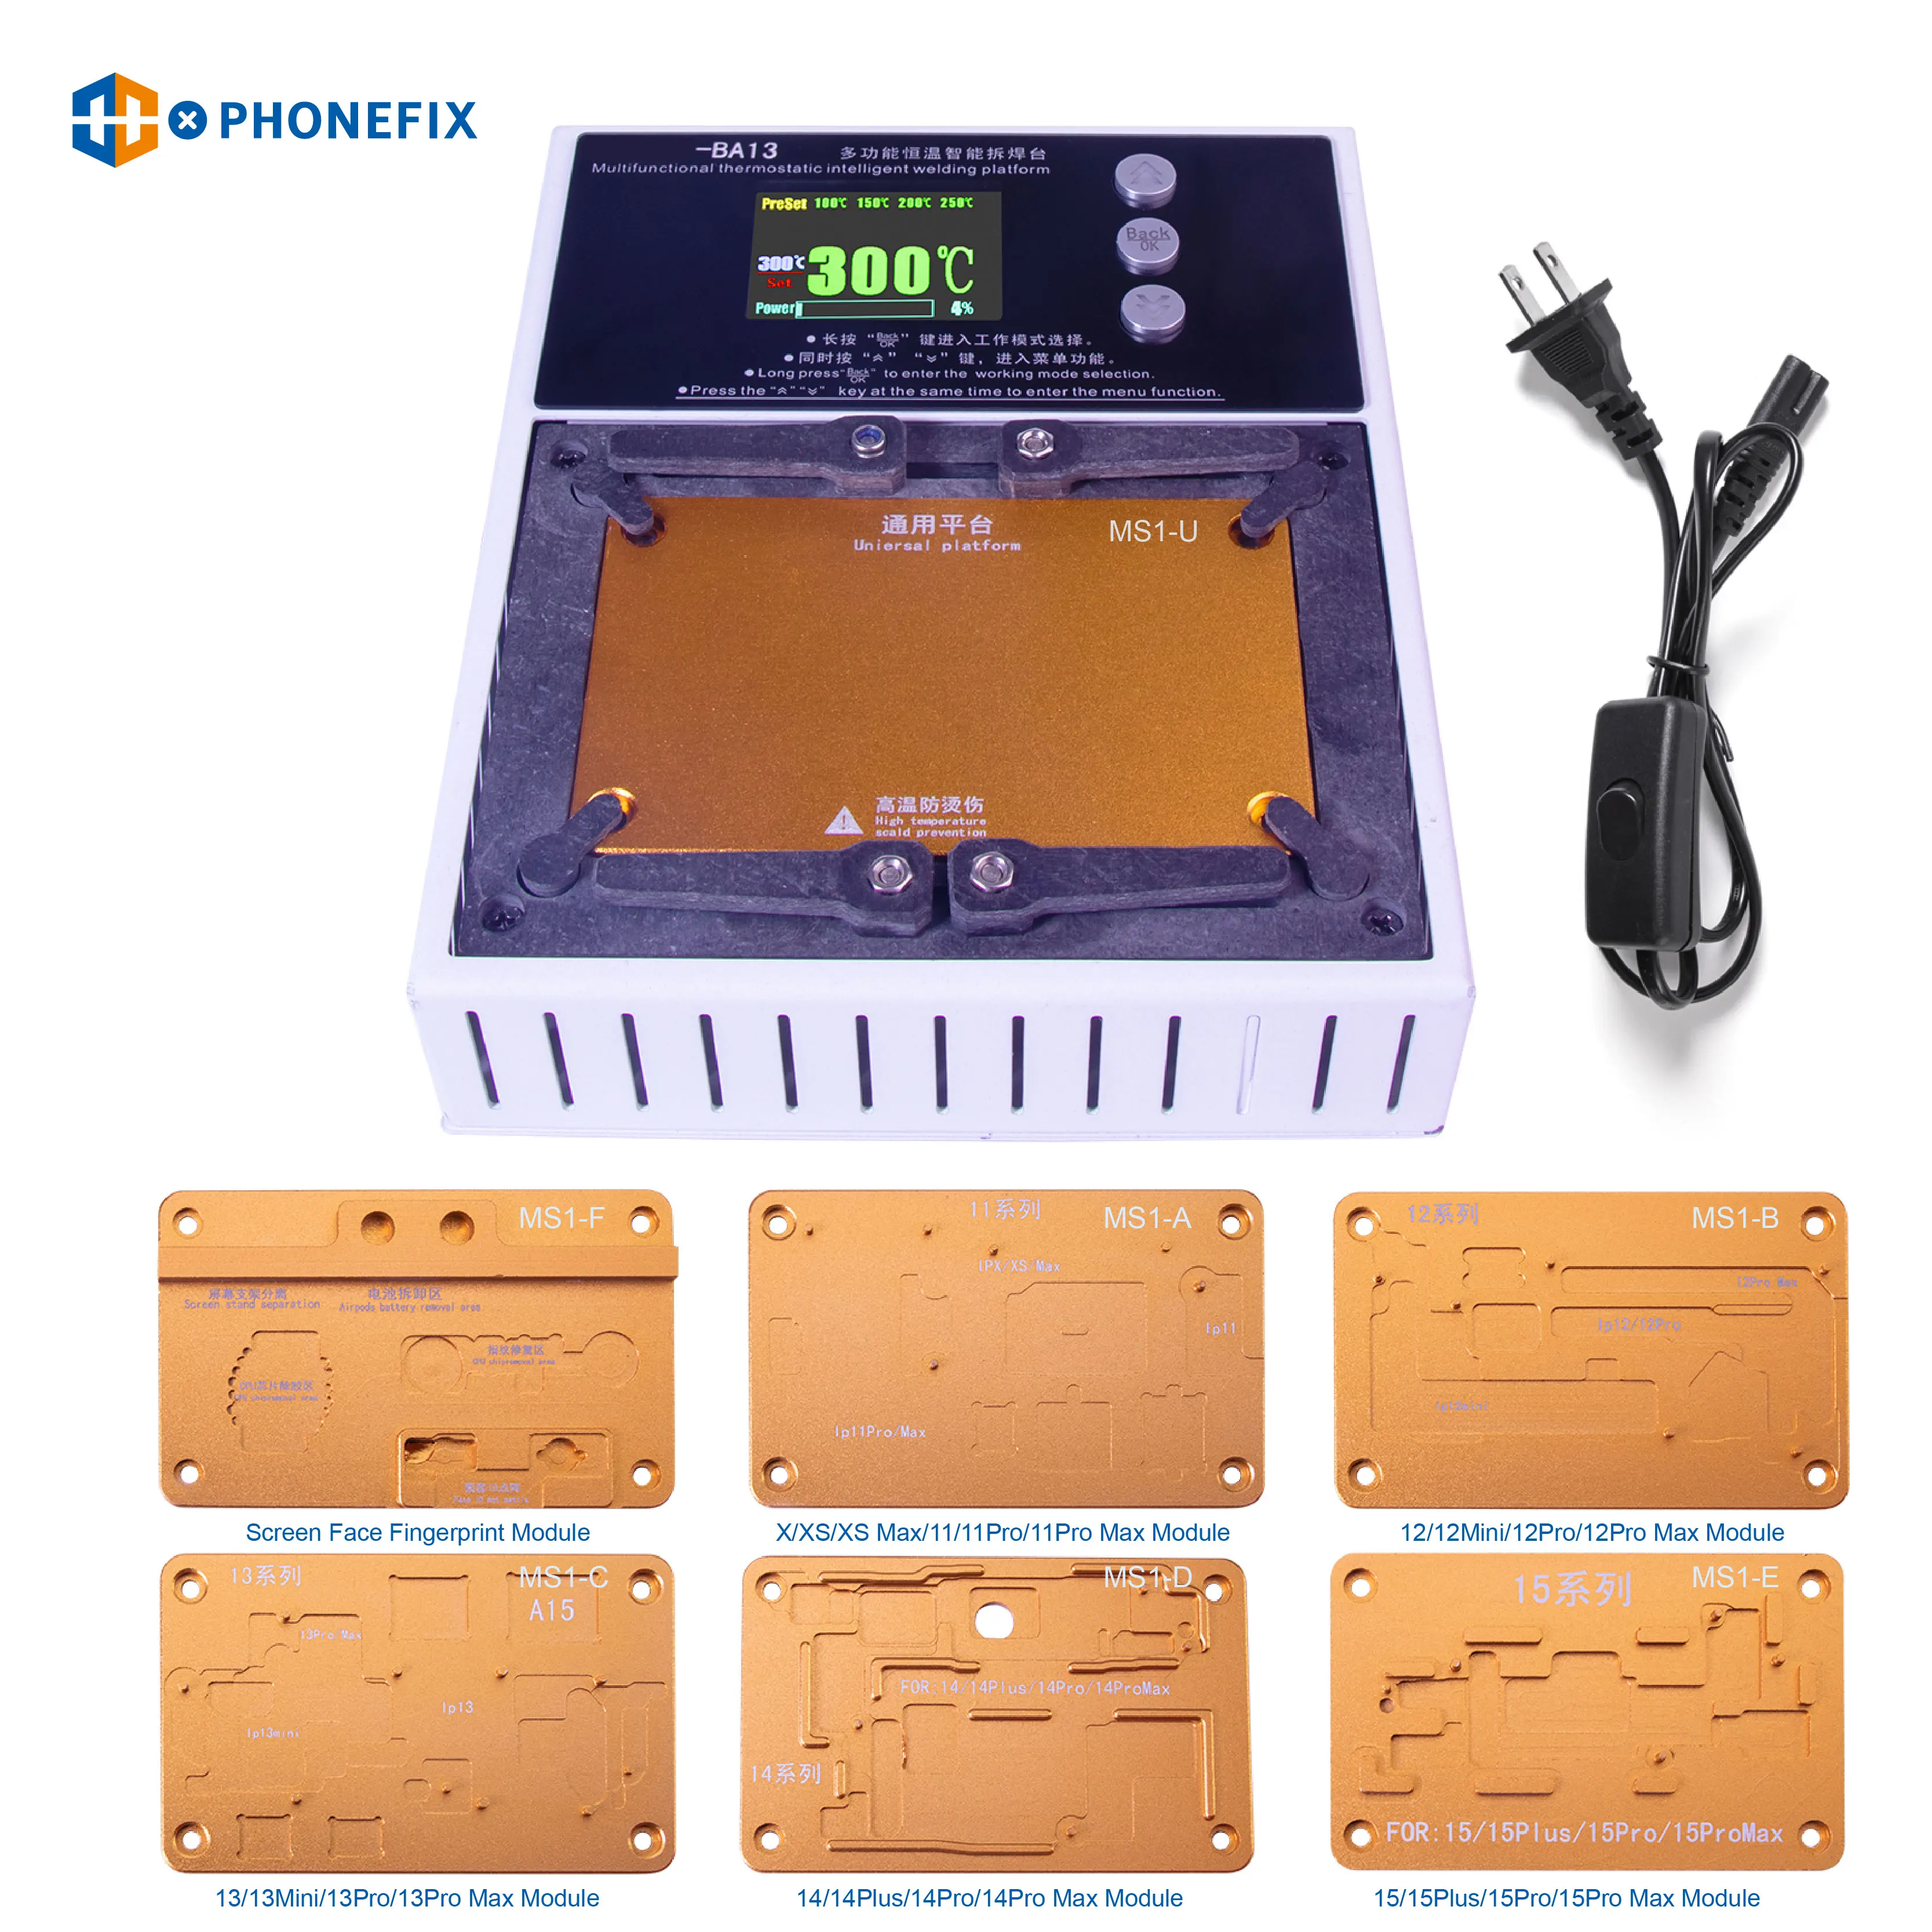 

PHONEFIX L2024 Multifunctional Desoldering Soldering Station Preheating Platform for iPhone X-15ProMax Middle Layer Board Repair